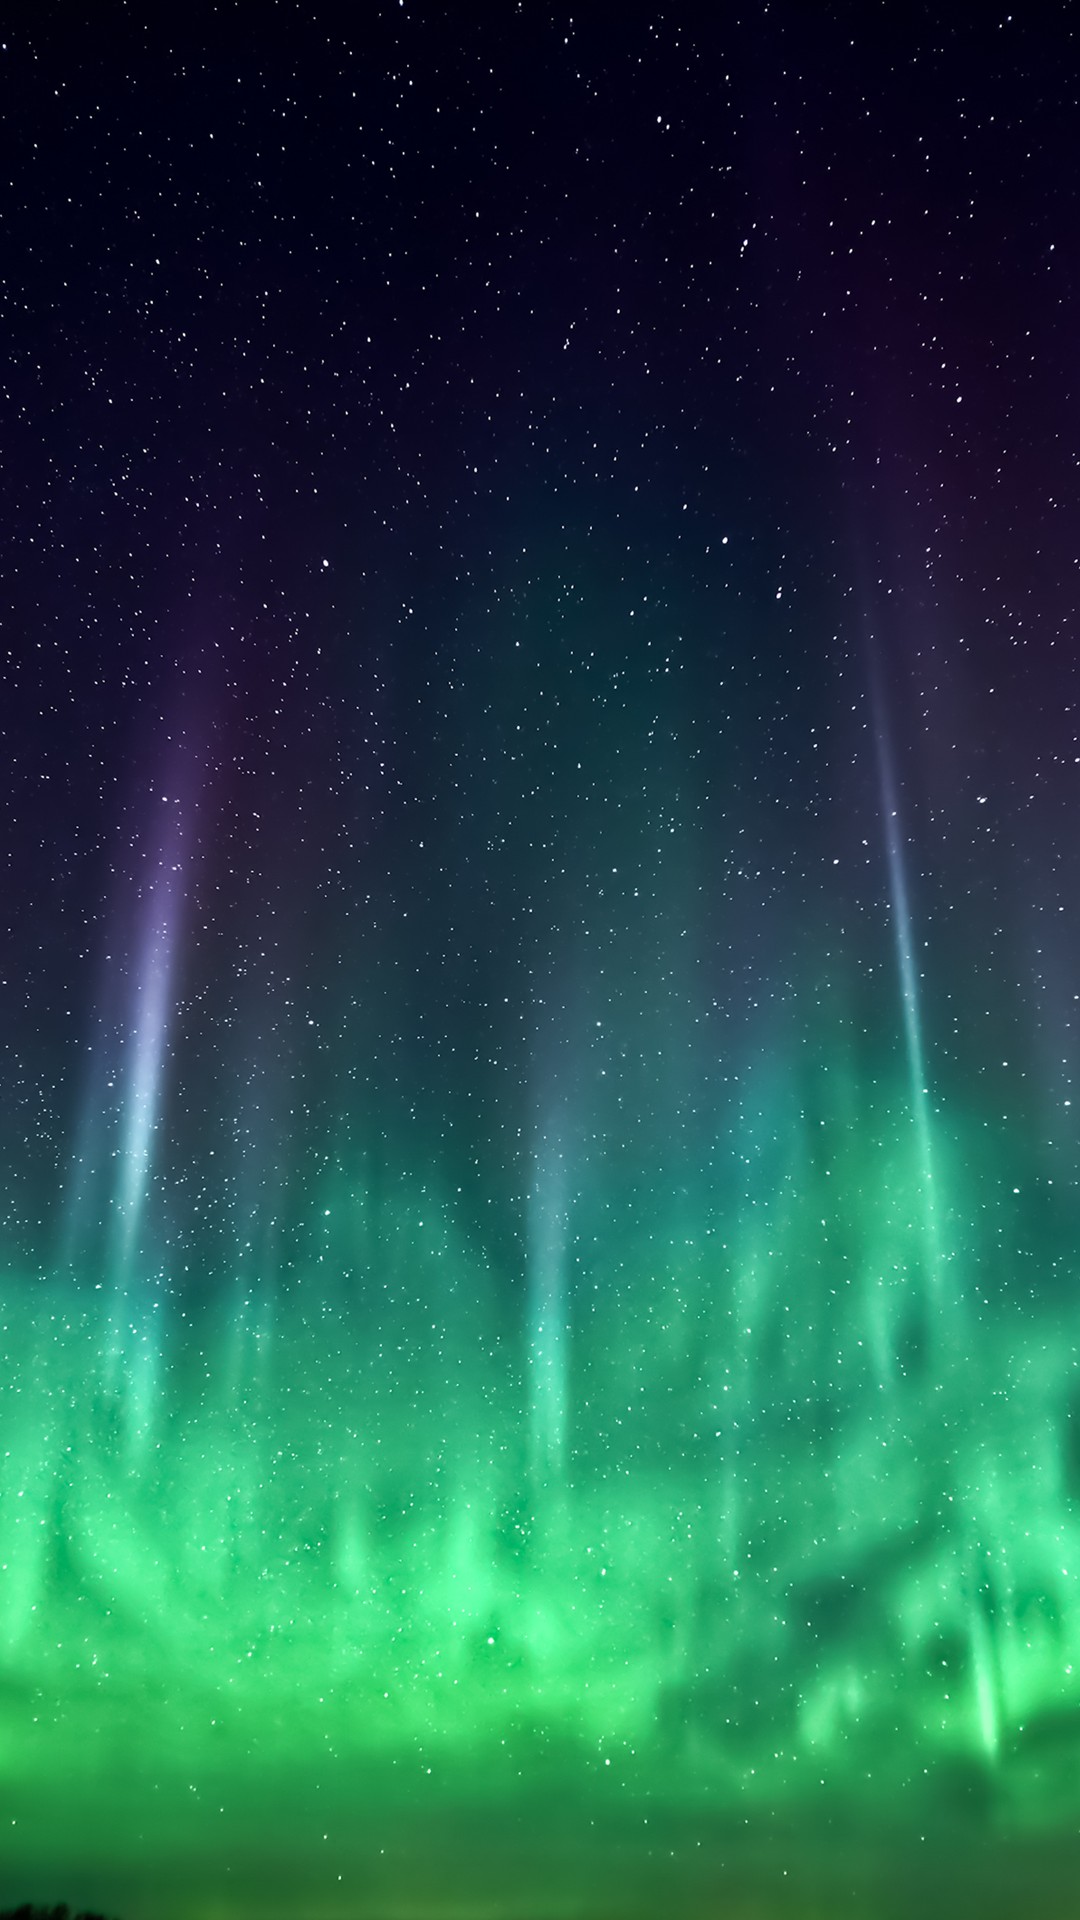 Aurora iPhone Wallpaper HD with high-resolution 1080x1920 pixel. You can set as wallpaper for Apple iPhone X, XS Max, XR, 8, 7, 6, SE, iPad. Enjoy and share your favorite HD wallpapers and background images